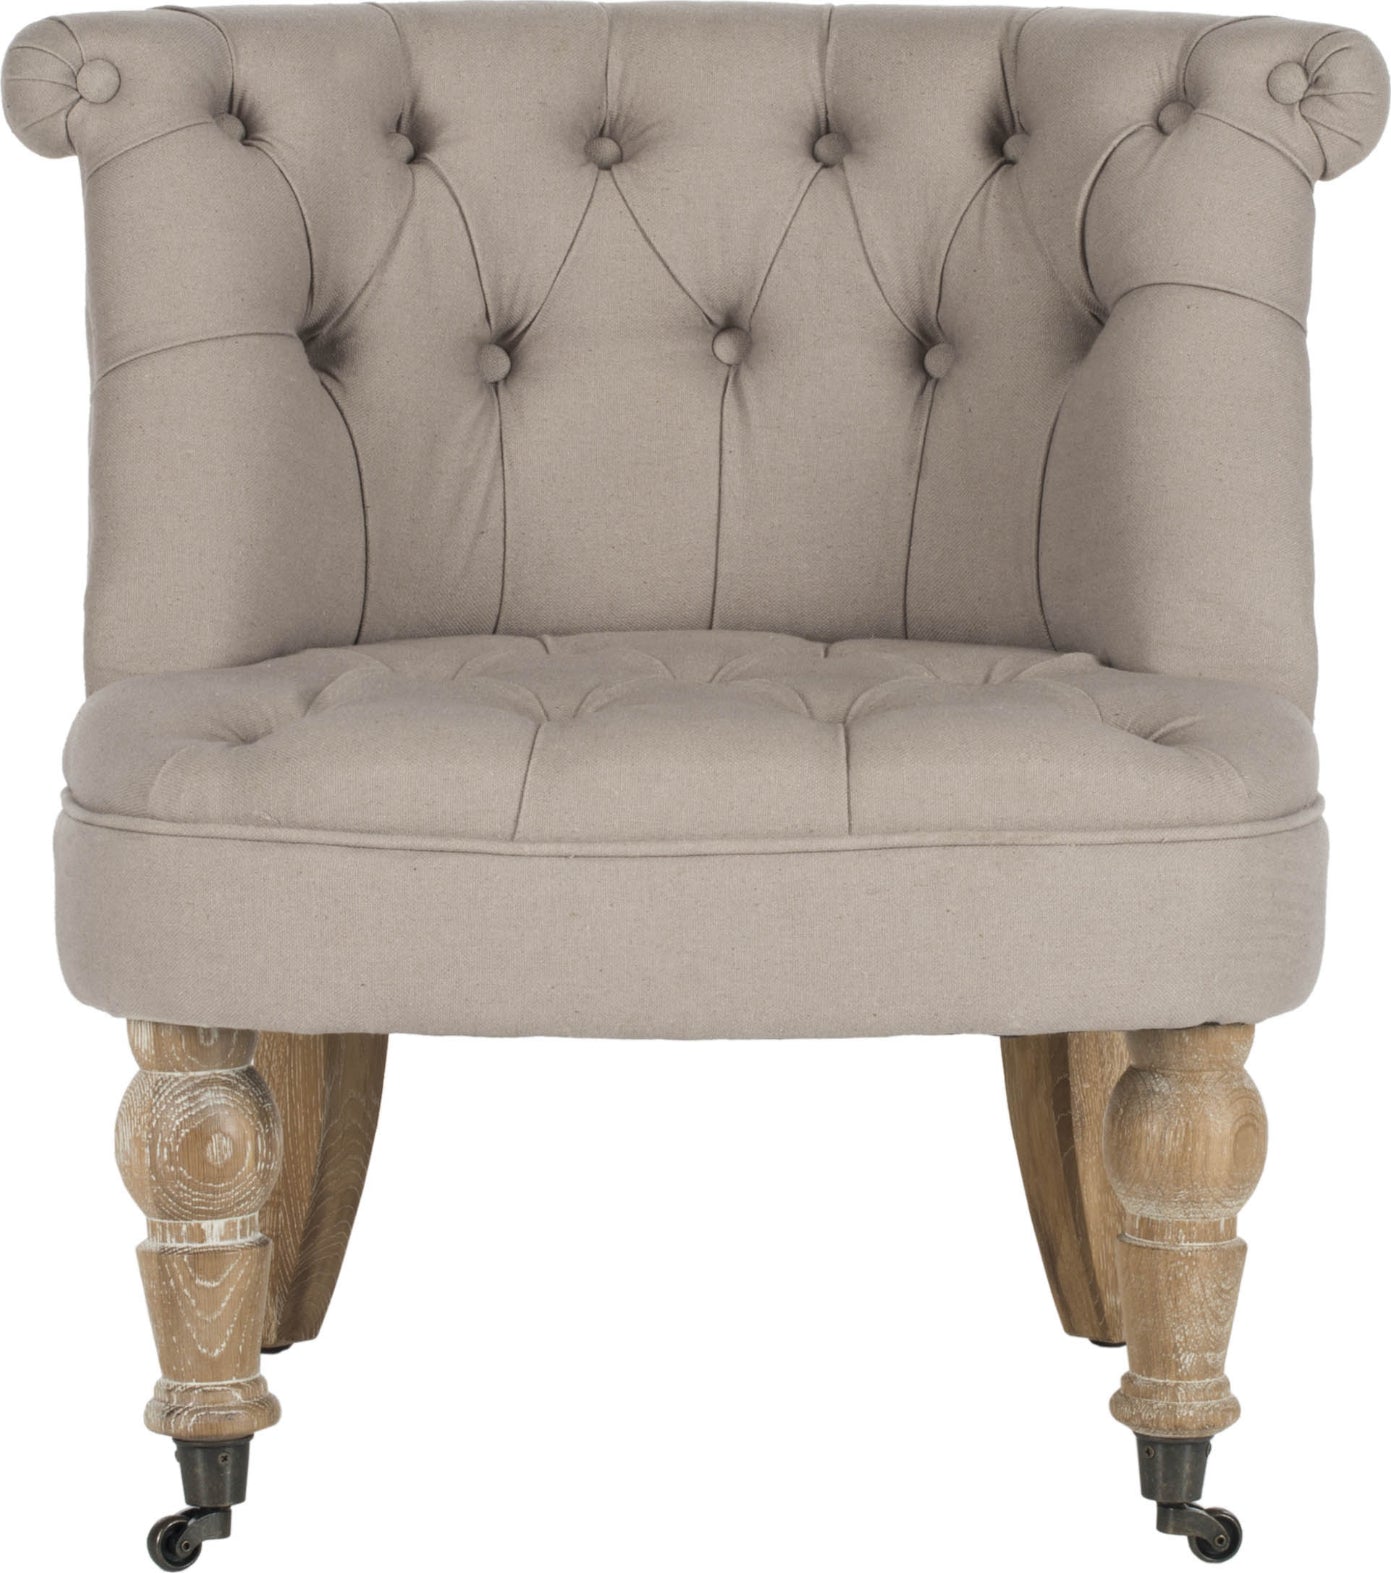 Safavieh Carlin Tufted Chair Taupe and White Wash Furniture main image